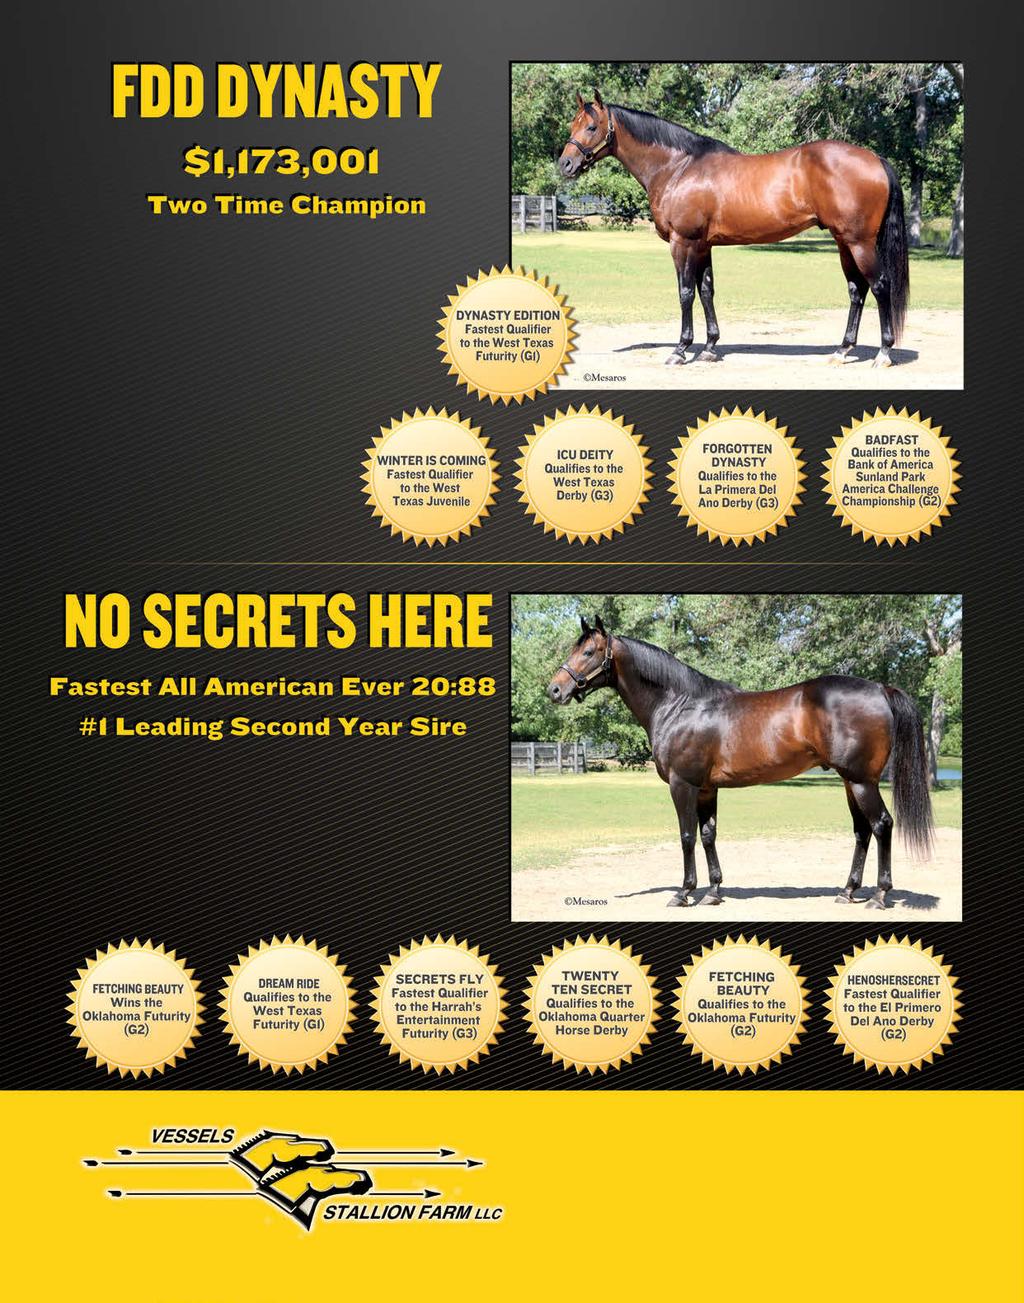 Sire of 2.6 Million In Earners Sire of Multiple Graded Stakes Qualifiers Owned by FDD DYNASTY SYNDICATE Limited number of 2013 season available Call The Farm Today! No.